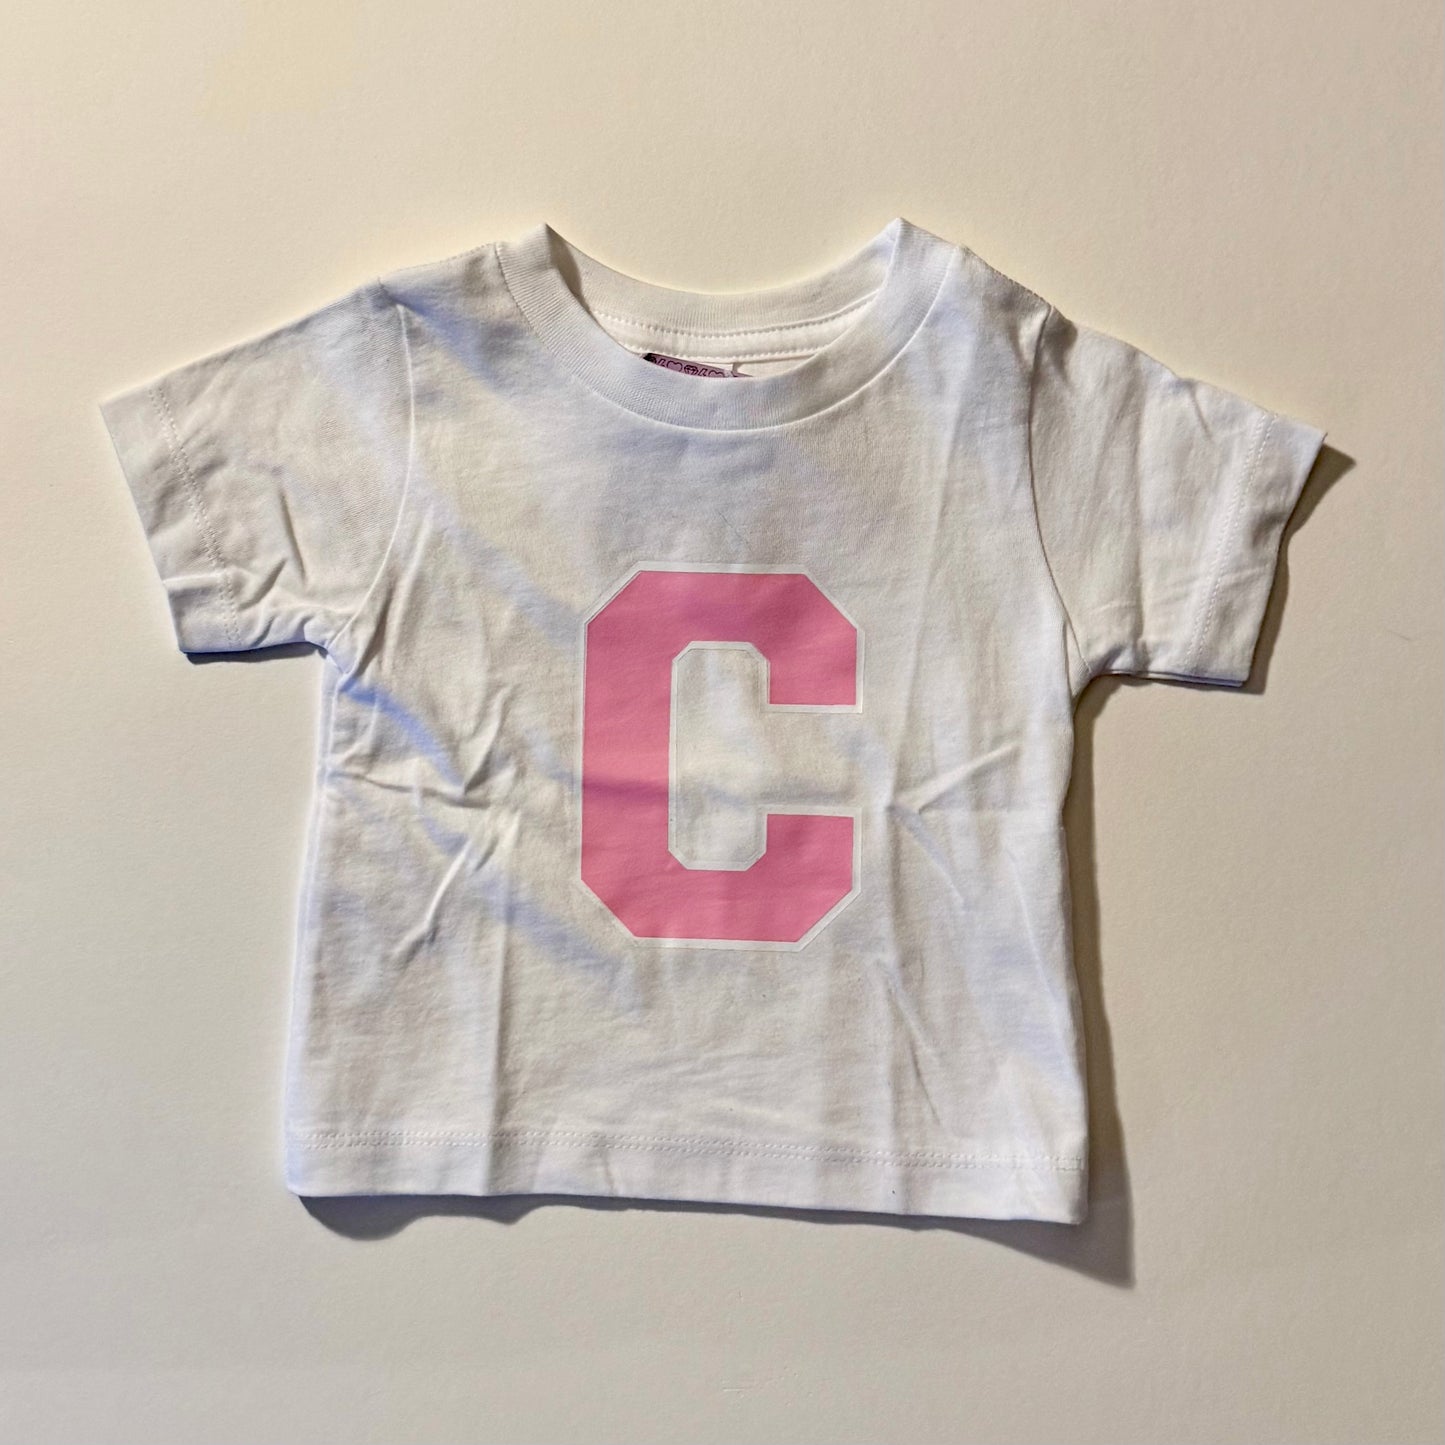 SALE Baby Personalised Varsity Initial T-Shirt - 6-12 months